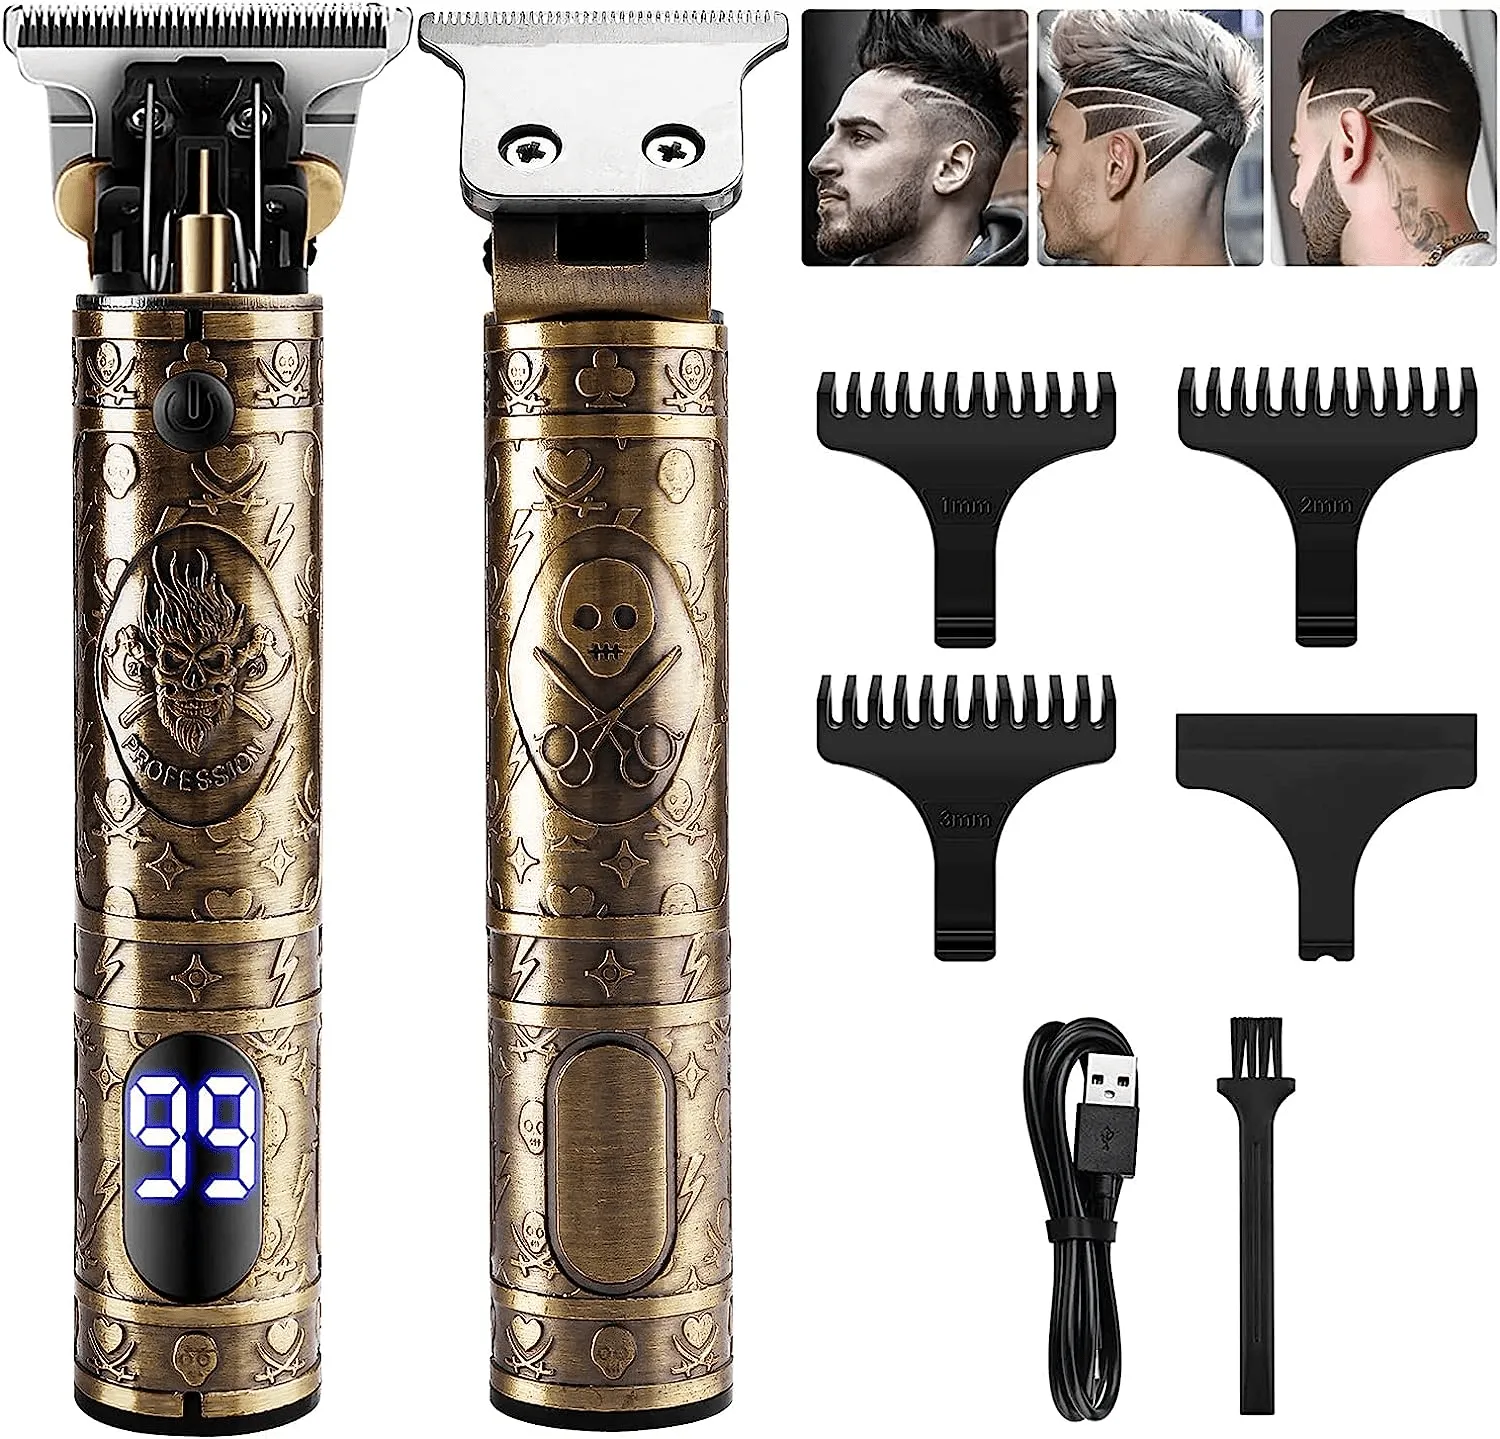 Professional Electric Hair Clippers for Men